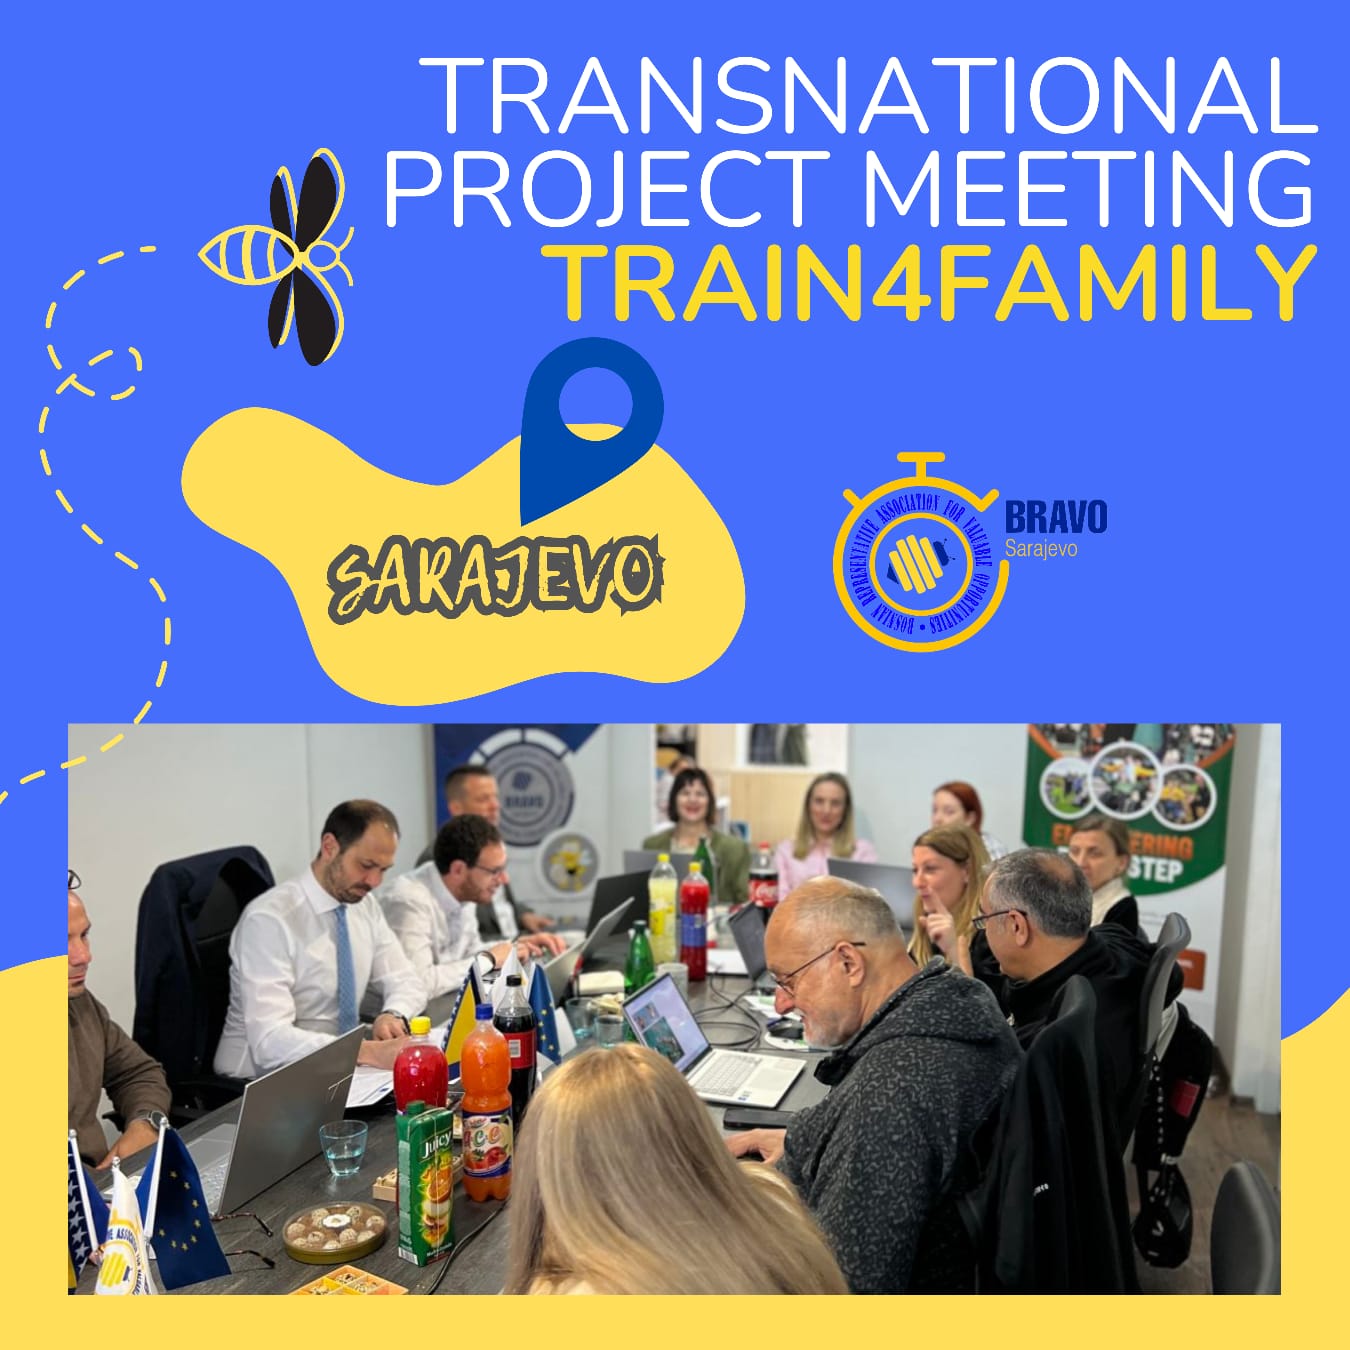 Transnational Project Meeting for The Project “Train4Family“ Was Held in Sarajevo